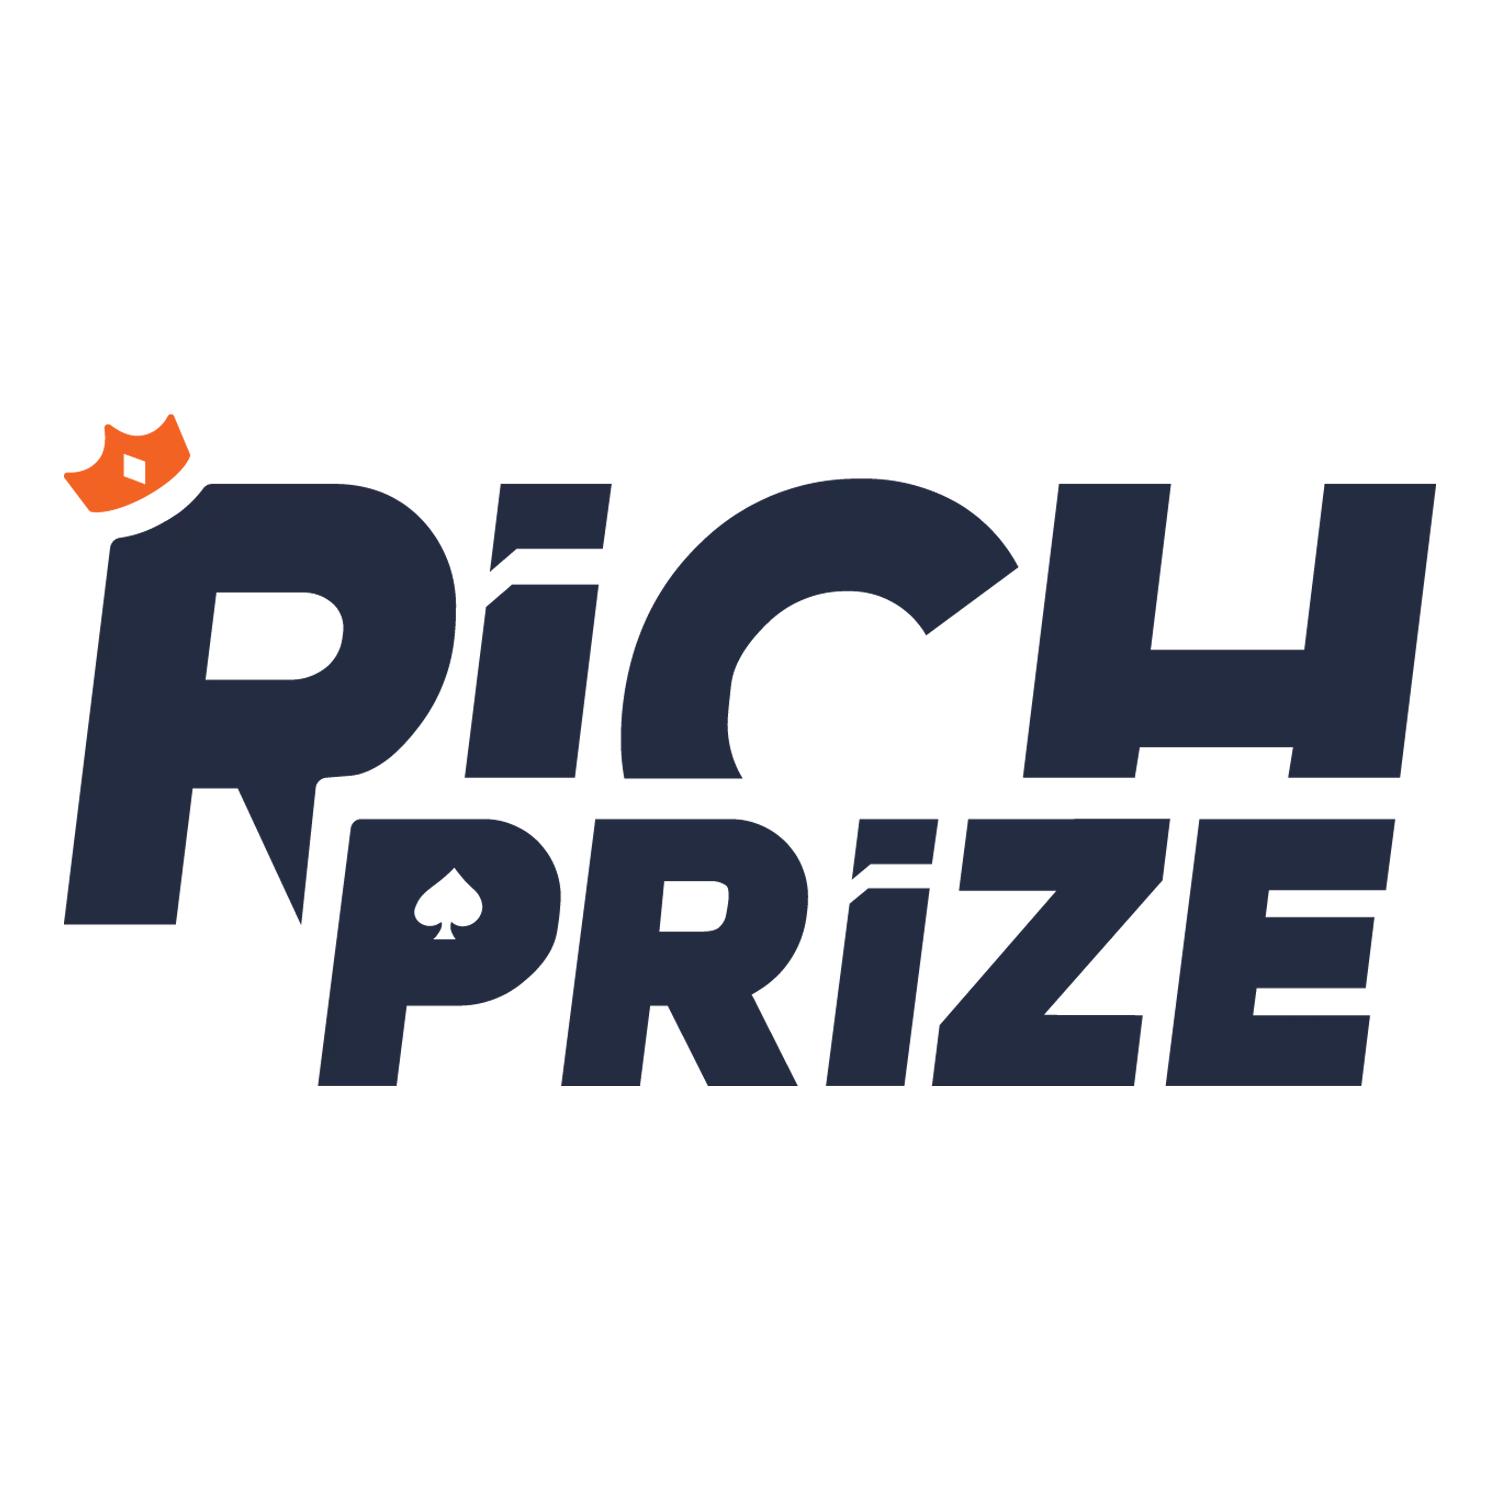 Learn how to place bets on sports events at RichPrize.